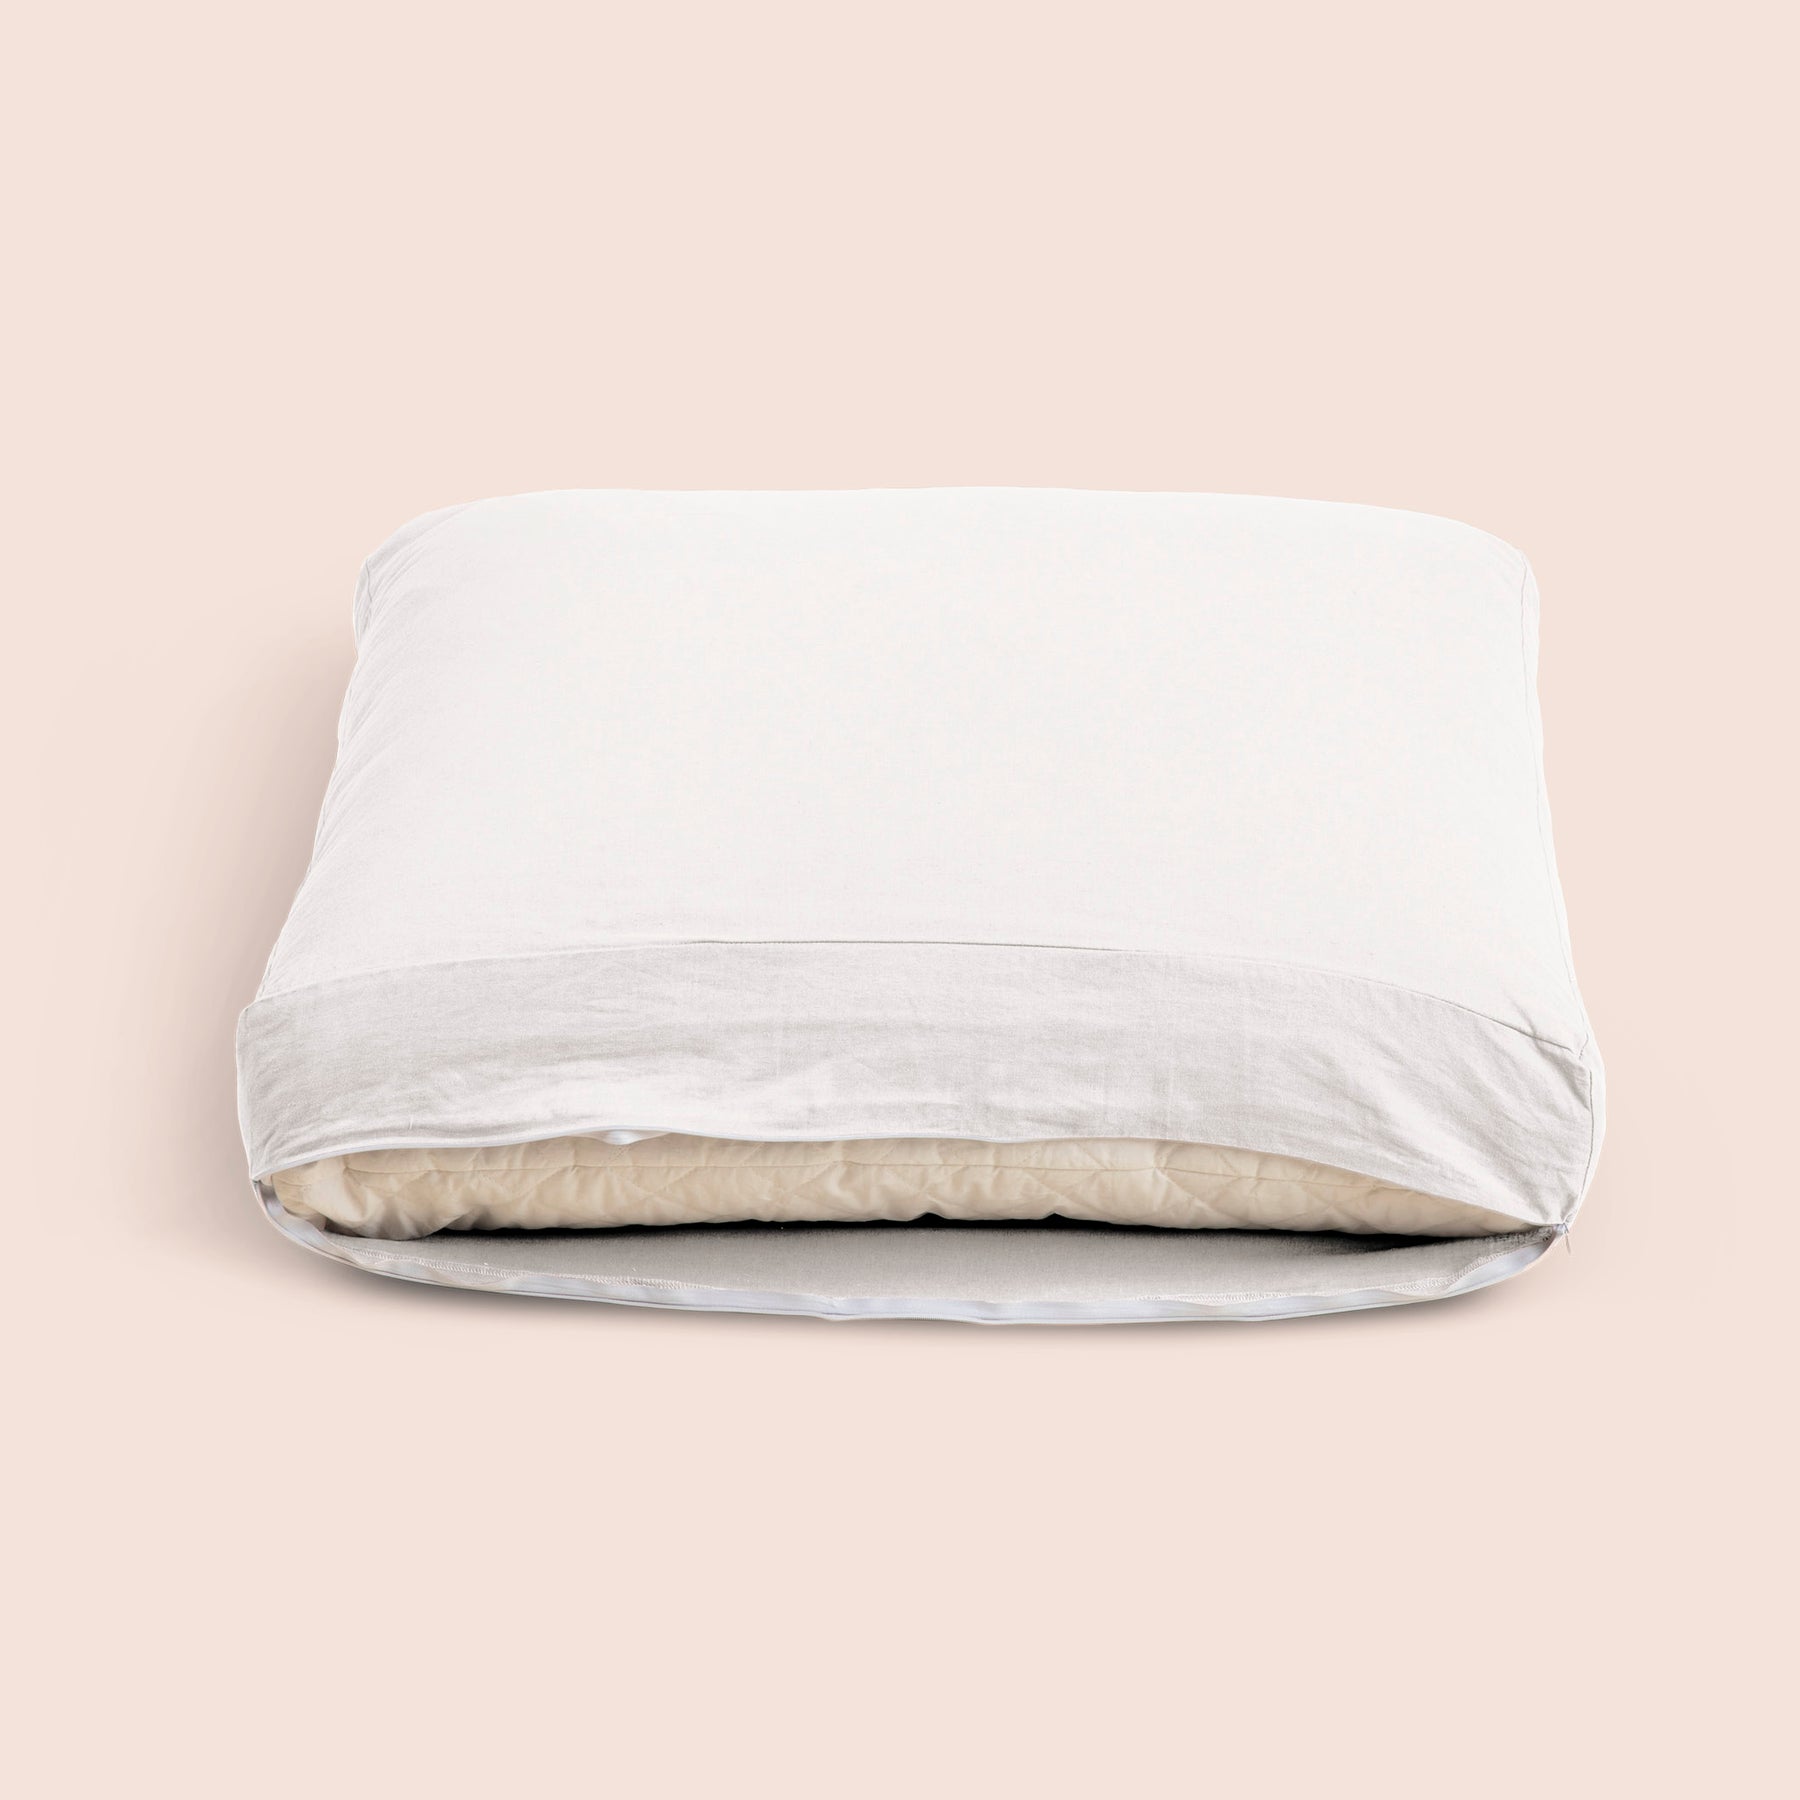 Image of the White Relaxed Hemp Meditation Cushion Cover showcasing an opened zipper with a meditation cushion inside on a light pink background 